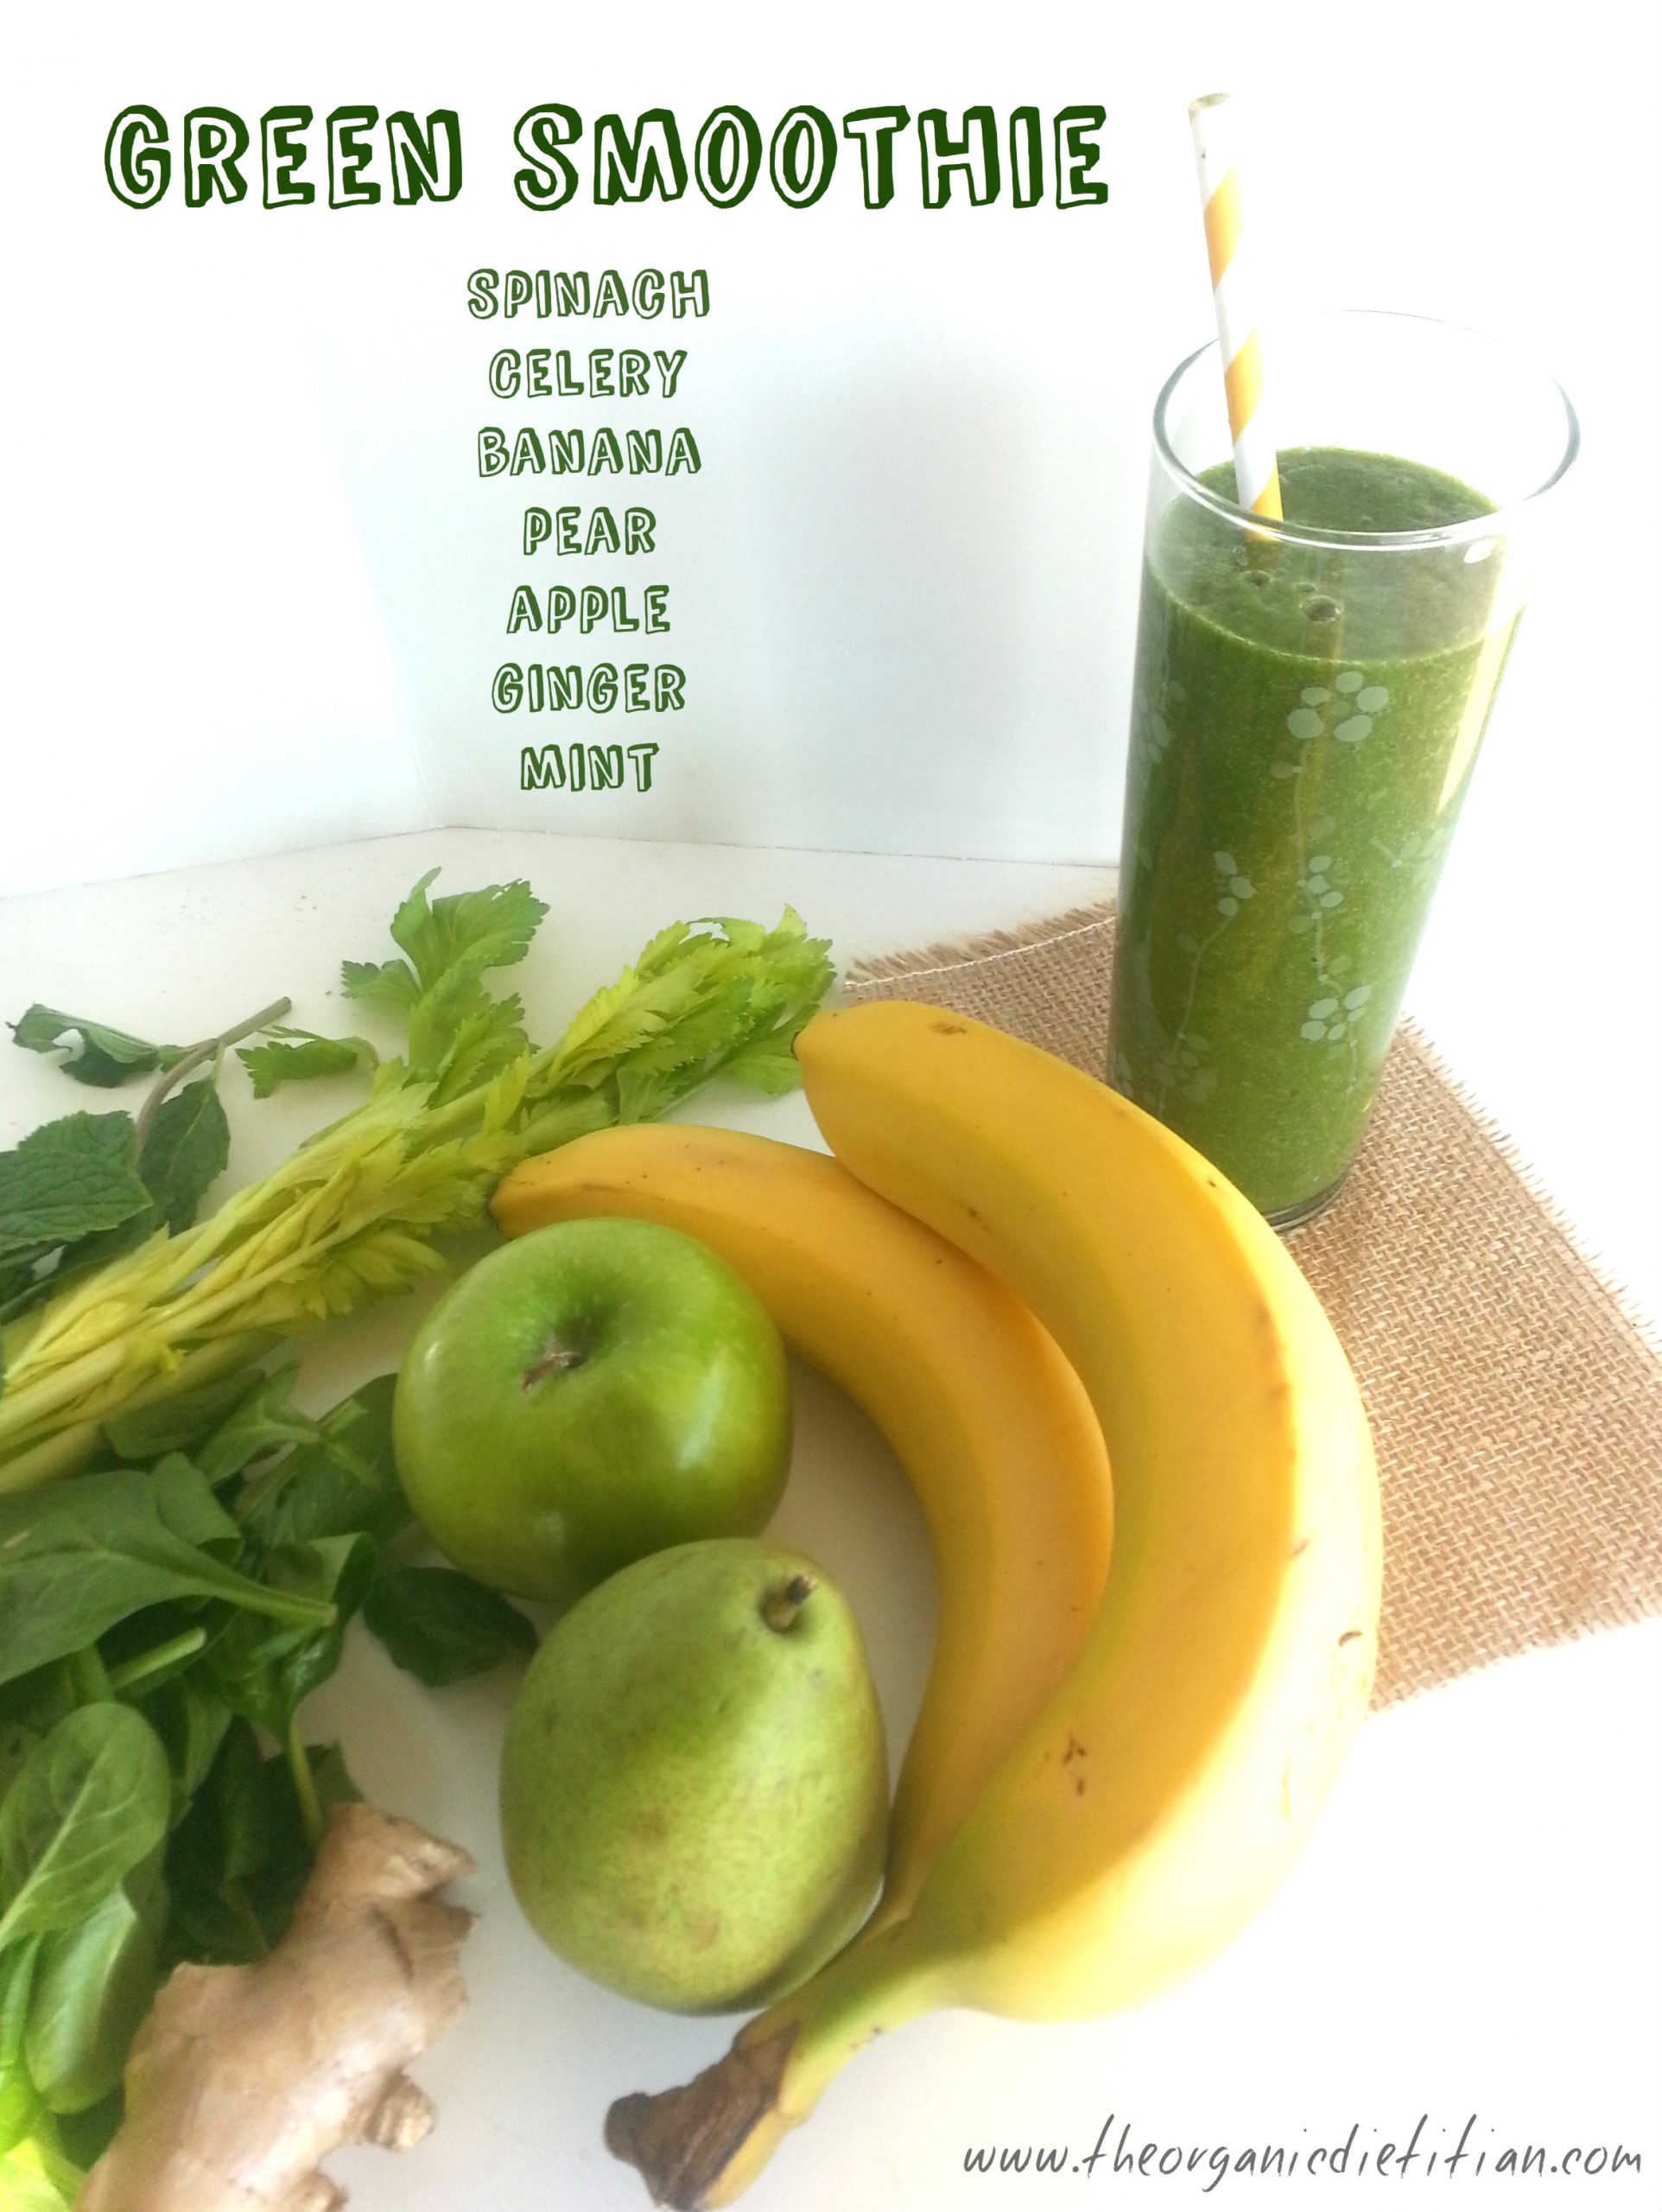 Get More Greens...Try a Green Smoothie or Green Juice ...